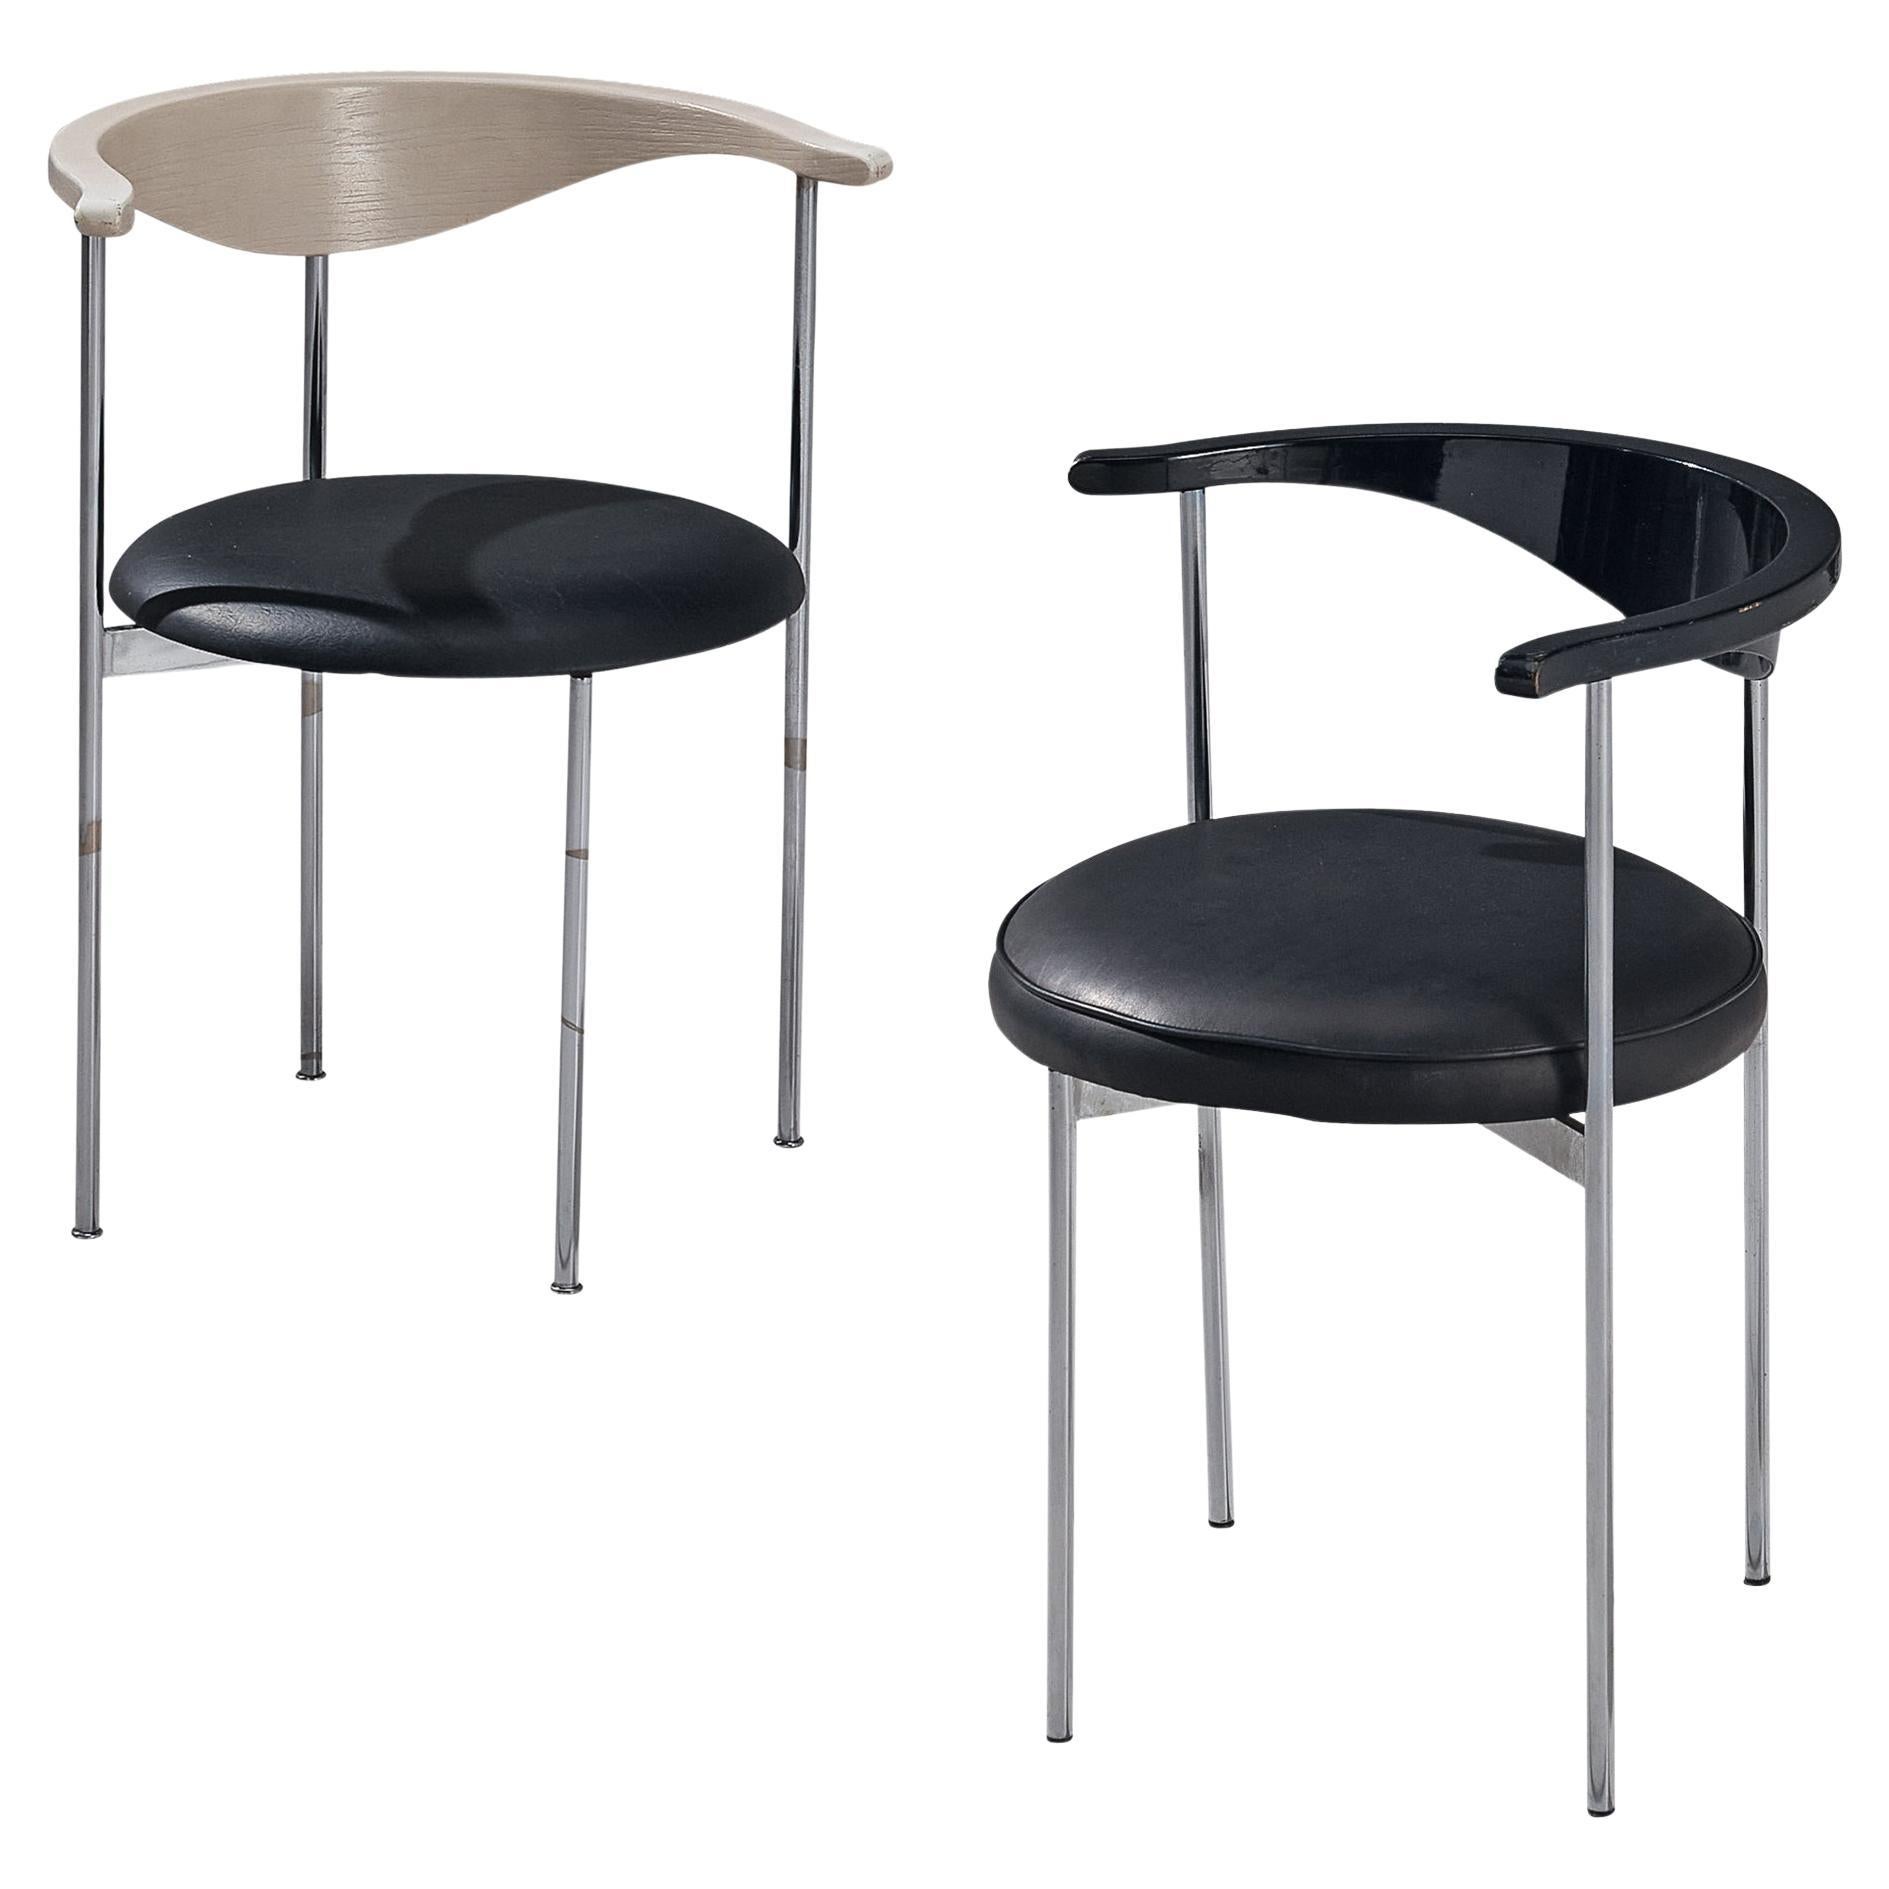 Frederik Sieck Pair of Chairs in Black and White For Sale